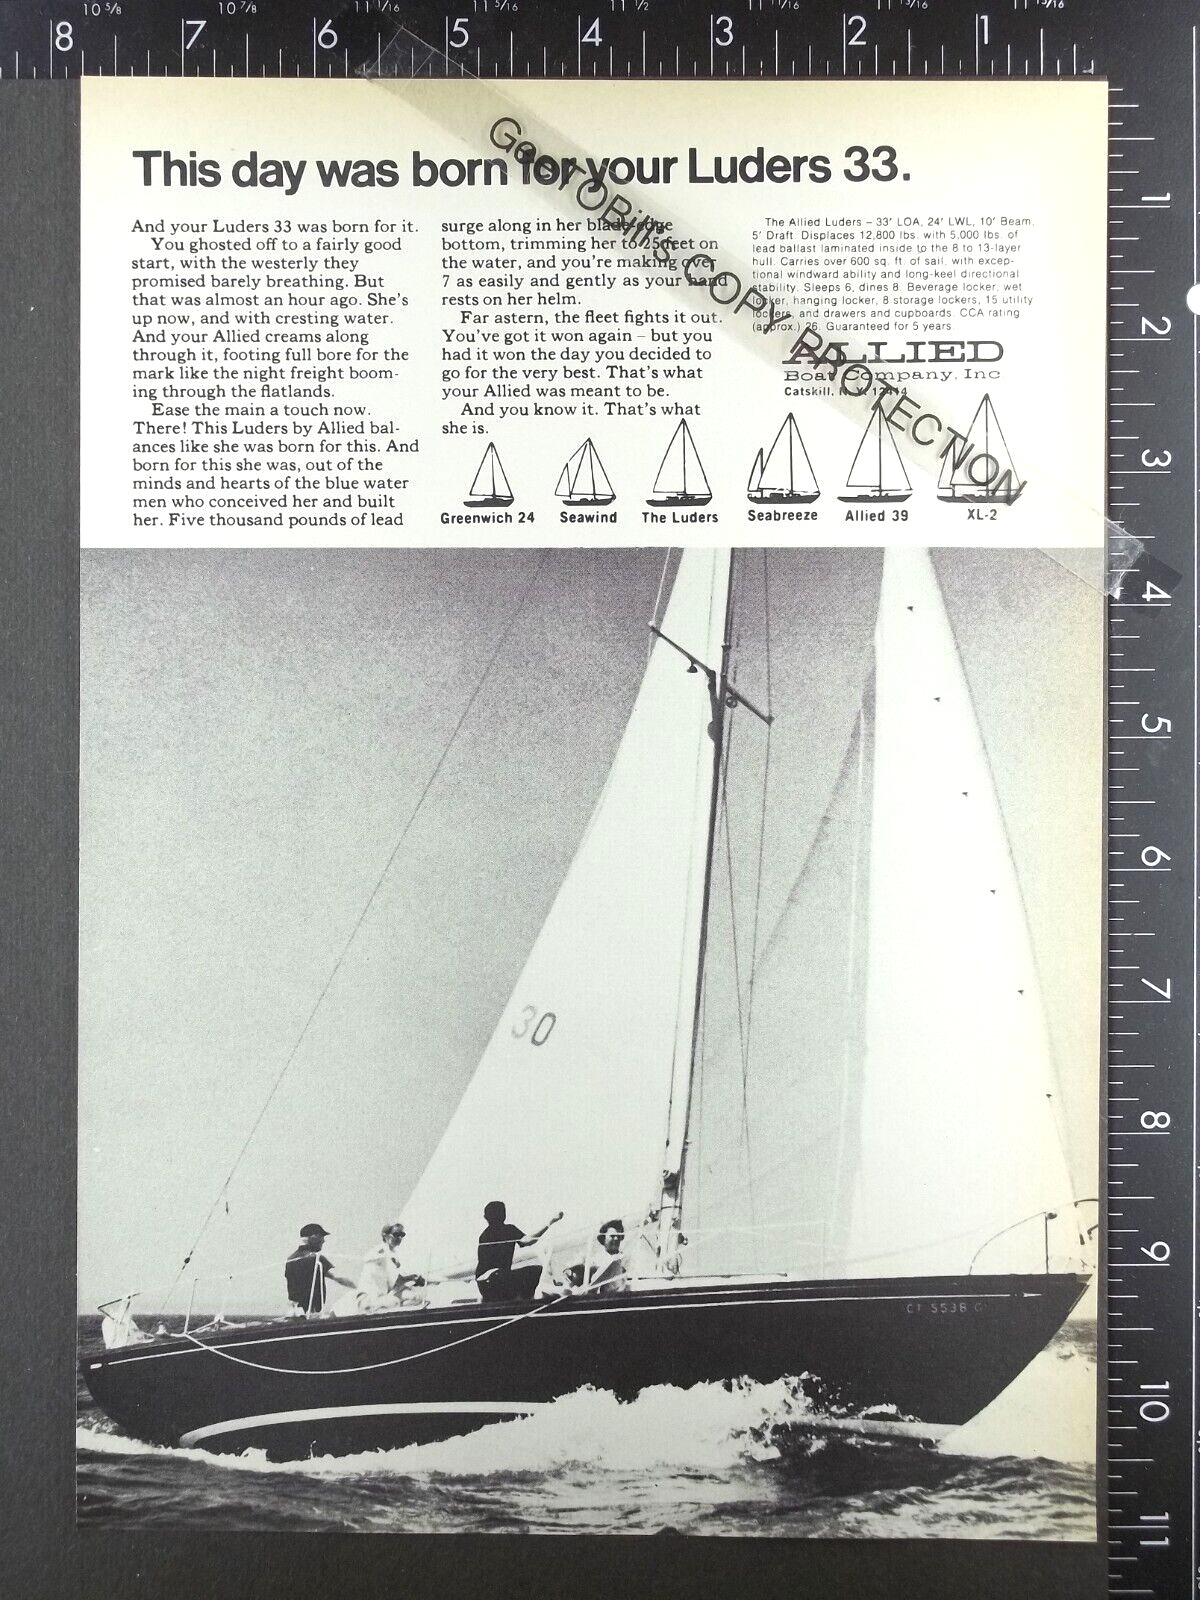 1969 ADVERTISEMENT for Allied Luders 33 sail motor yacht boat